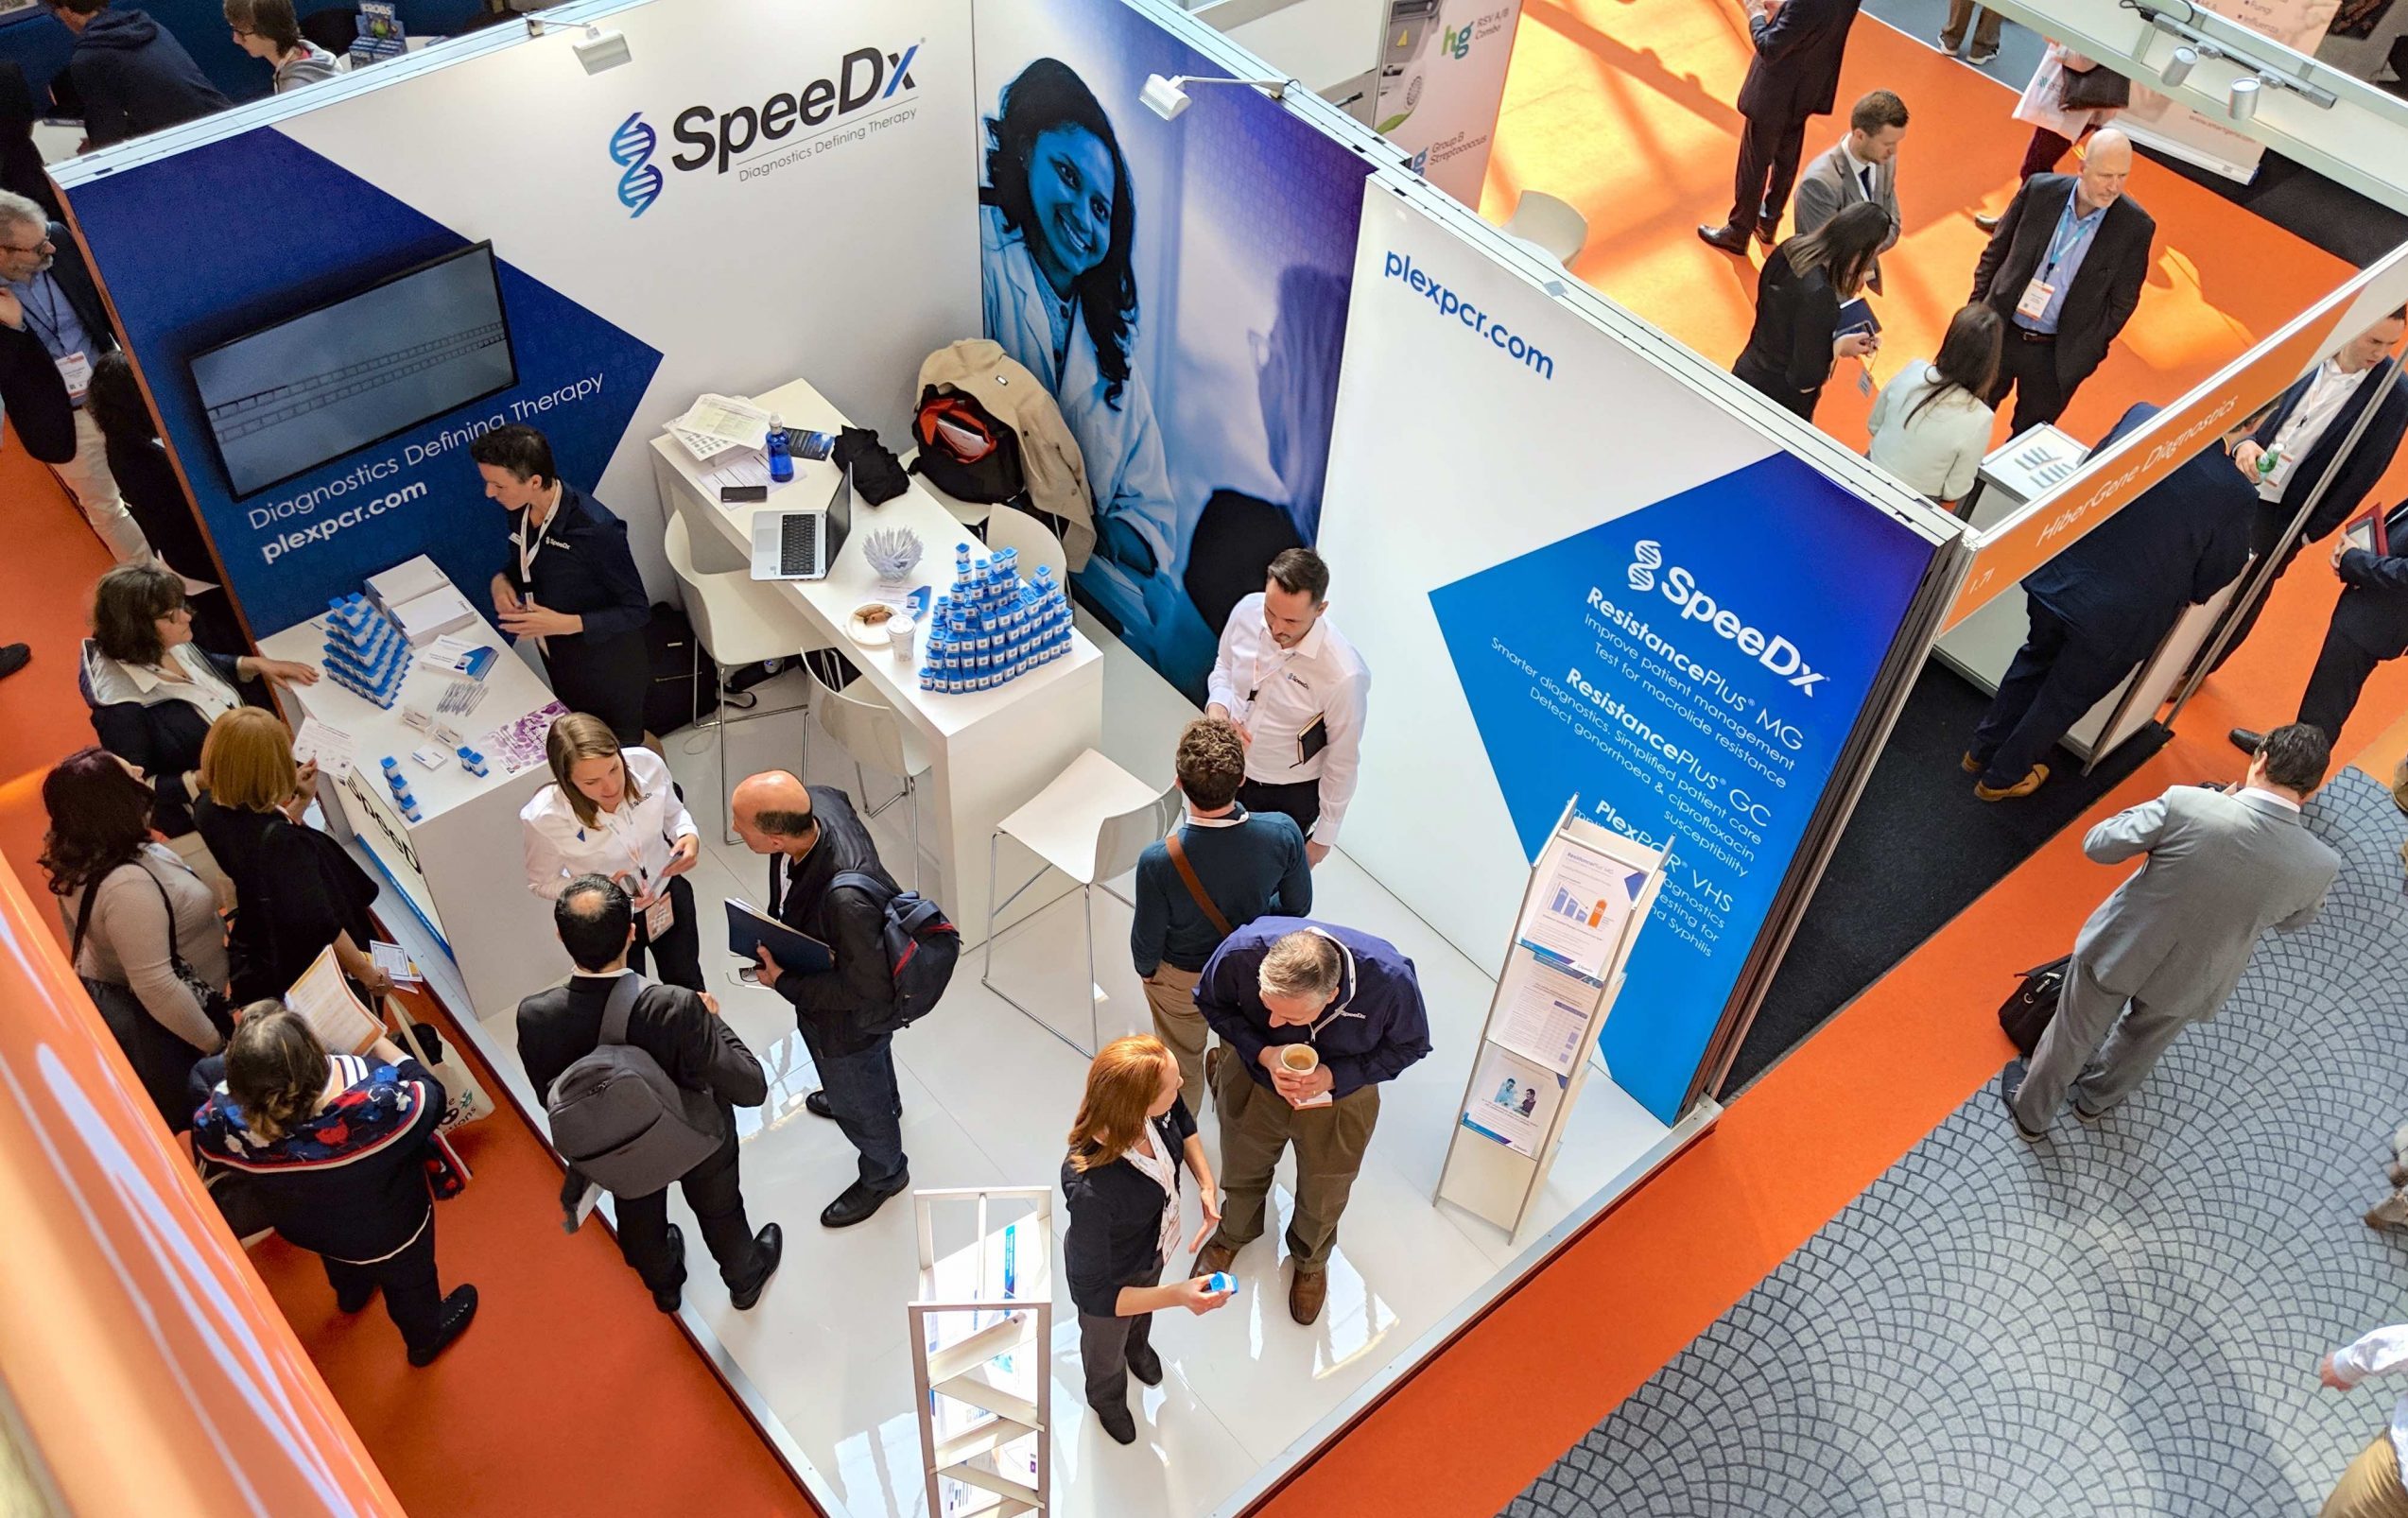 SpeeDx exhibition booth at conference